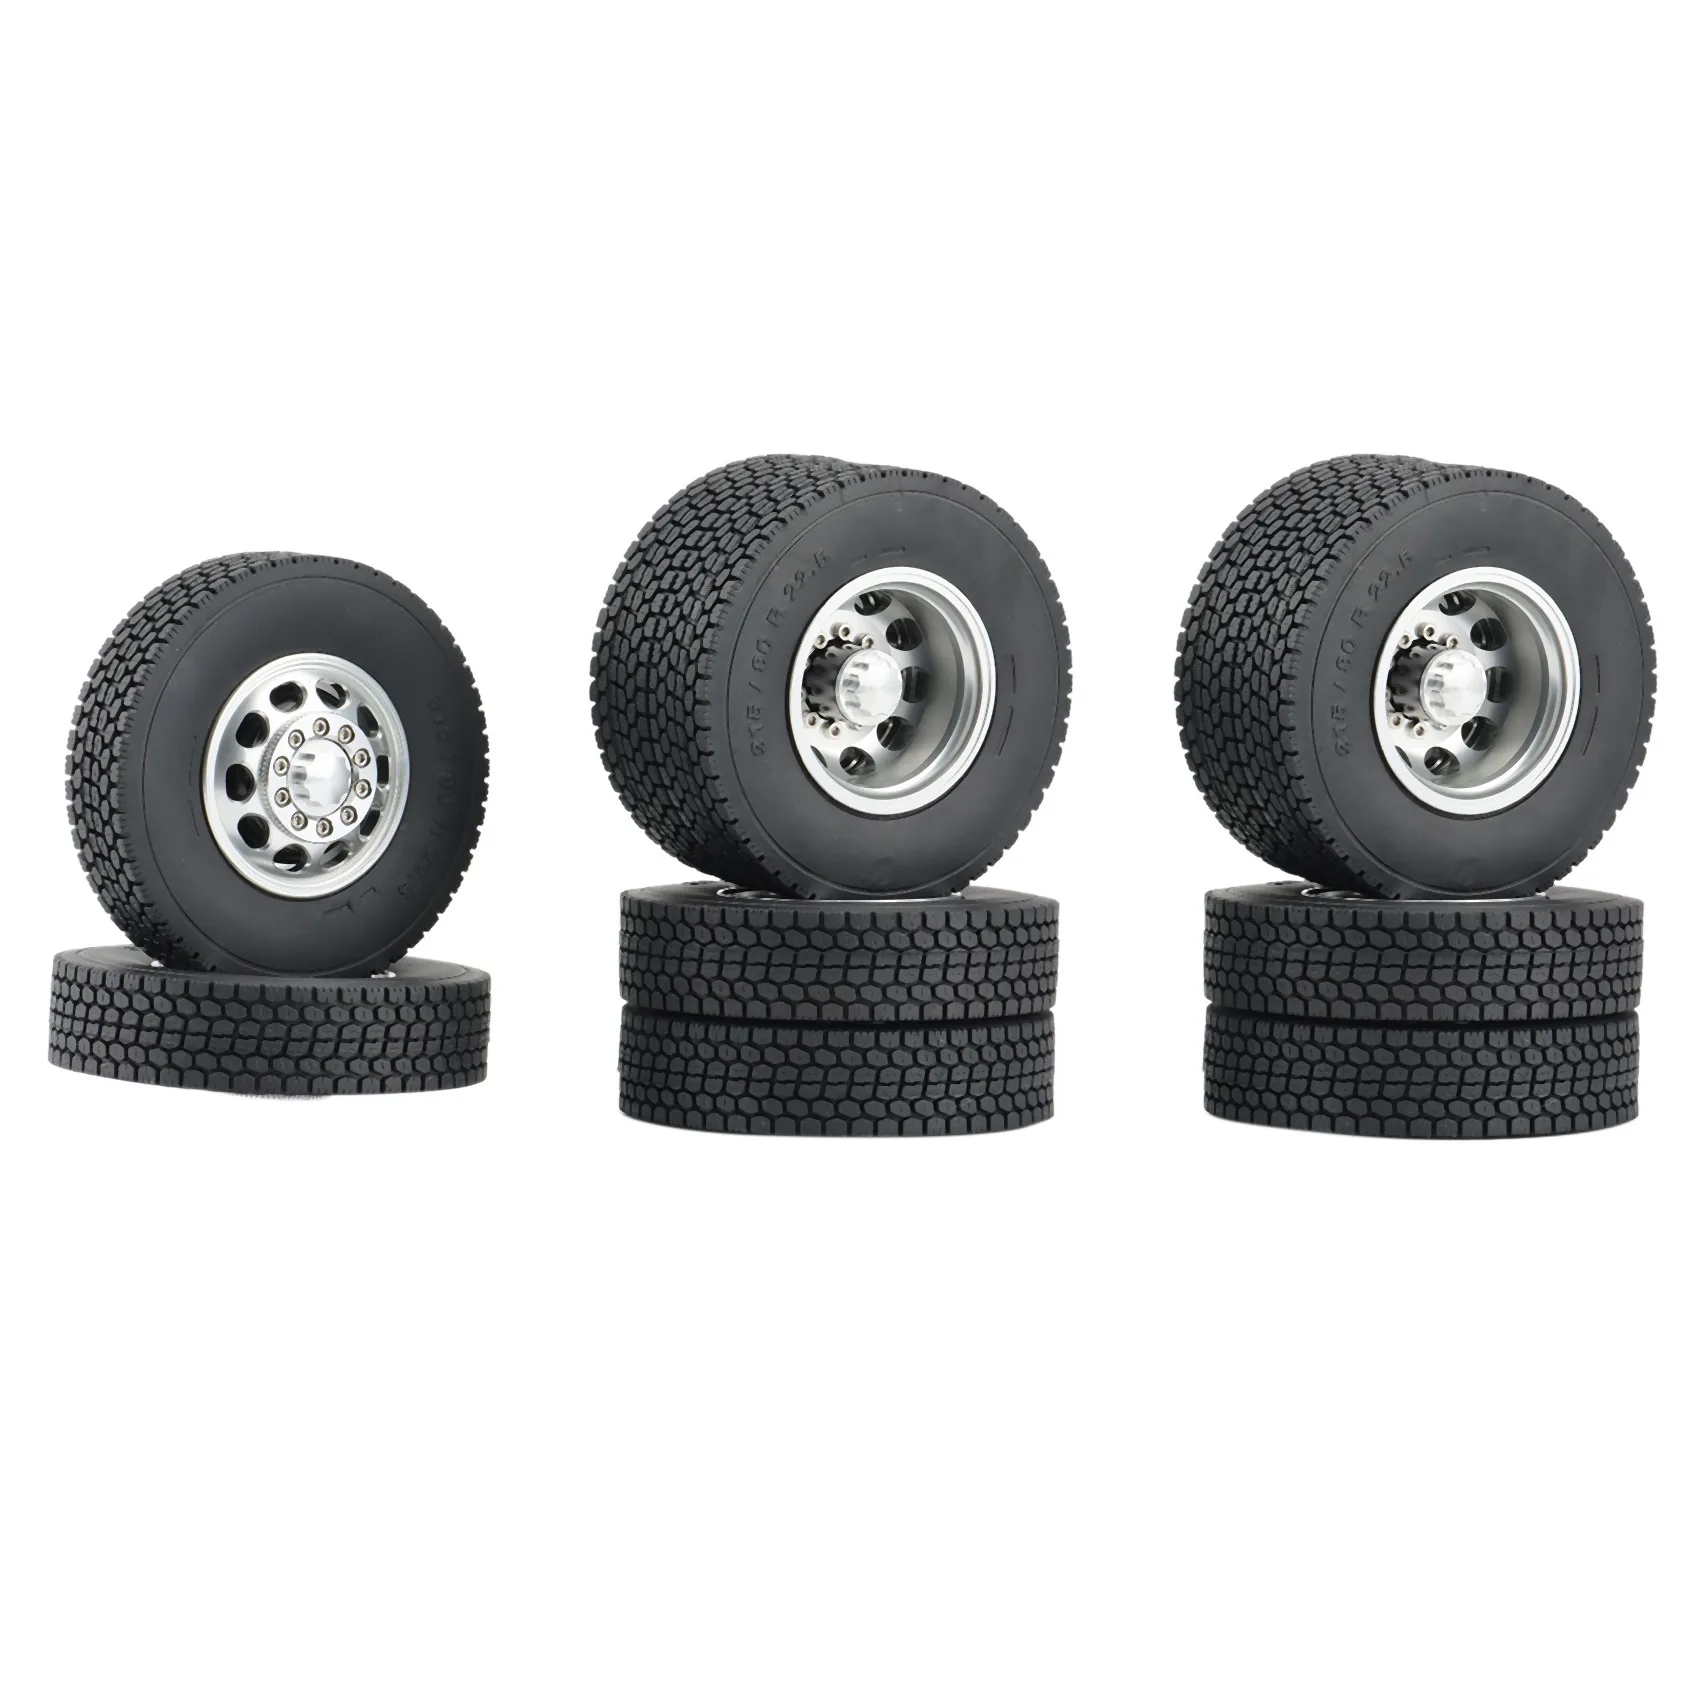 

Metal Front & Rear Wheel Rims Hub with 22mm Rubber Tires for 1/14 Tamiya SCANIA Semi RC Trailer Tractor Truck Car Parts B